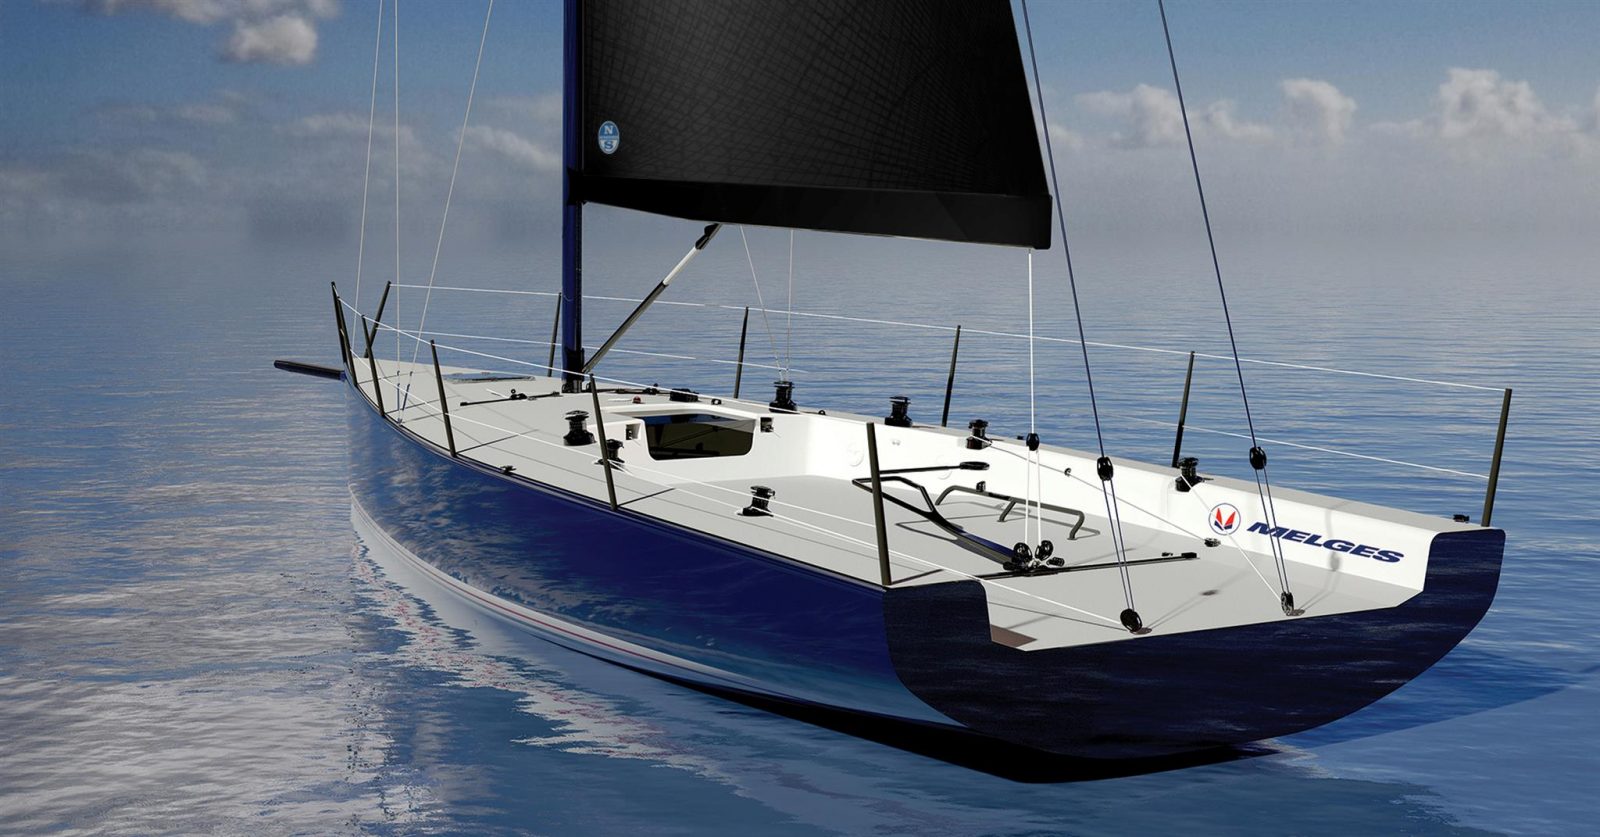 NORTH SAILS EXCLUSIVE SAIL SUPPLIER FOR THE NEW IC37 BY MELGES